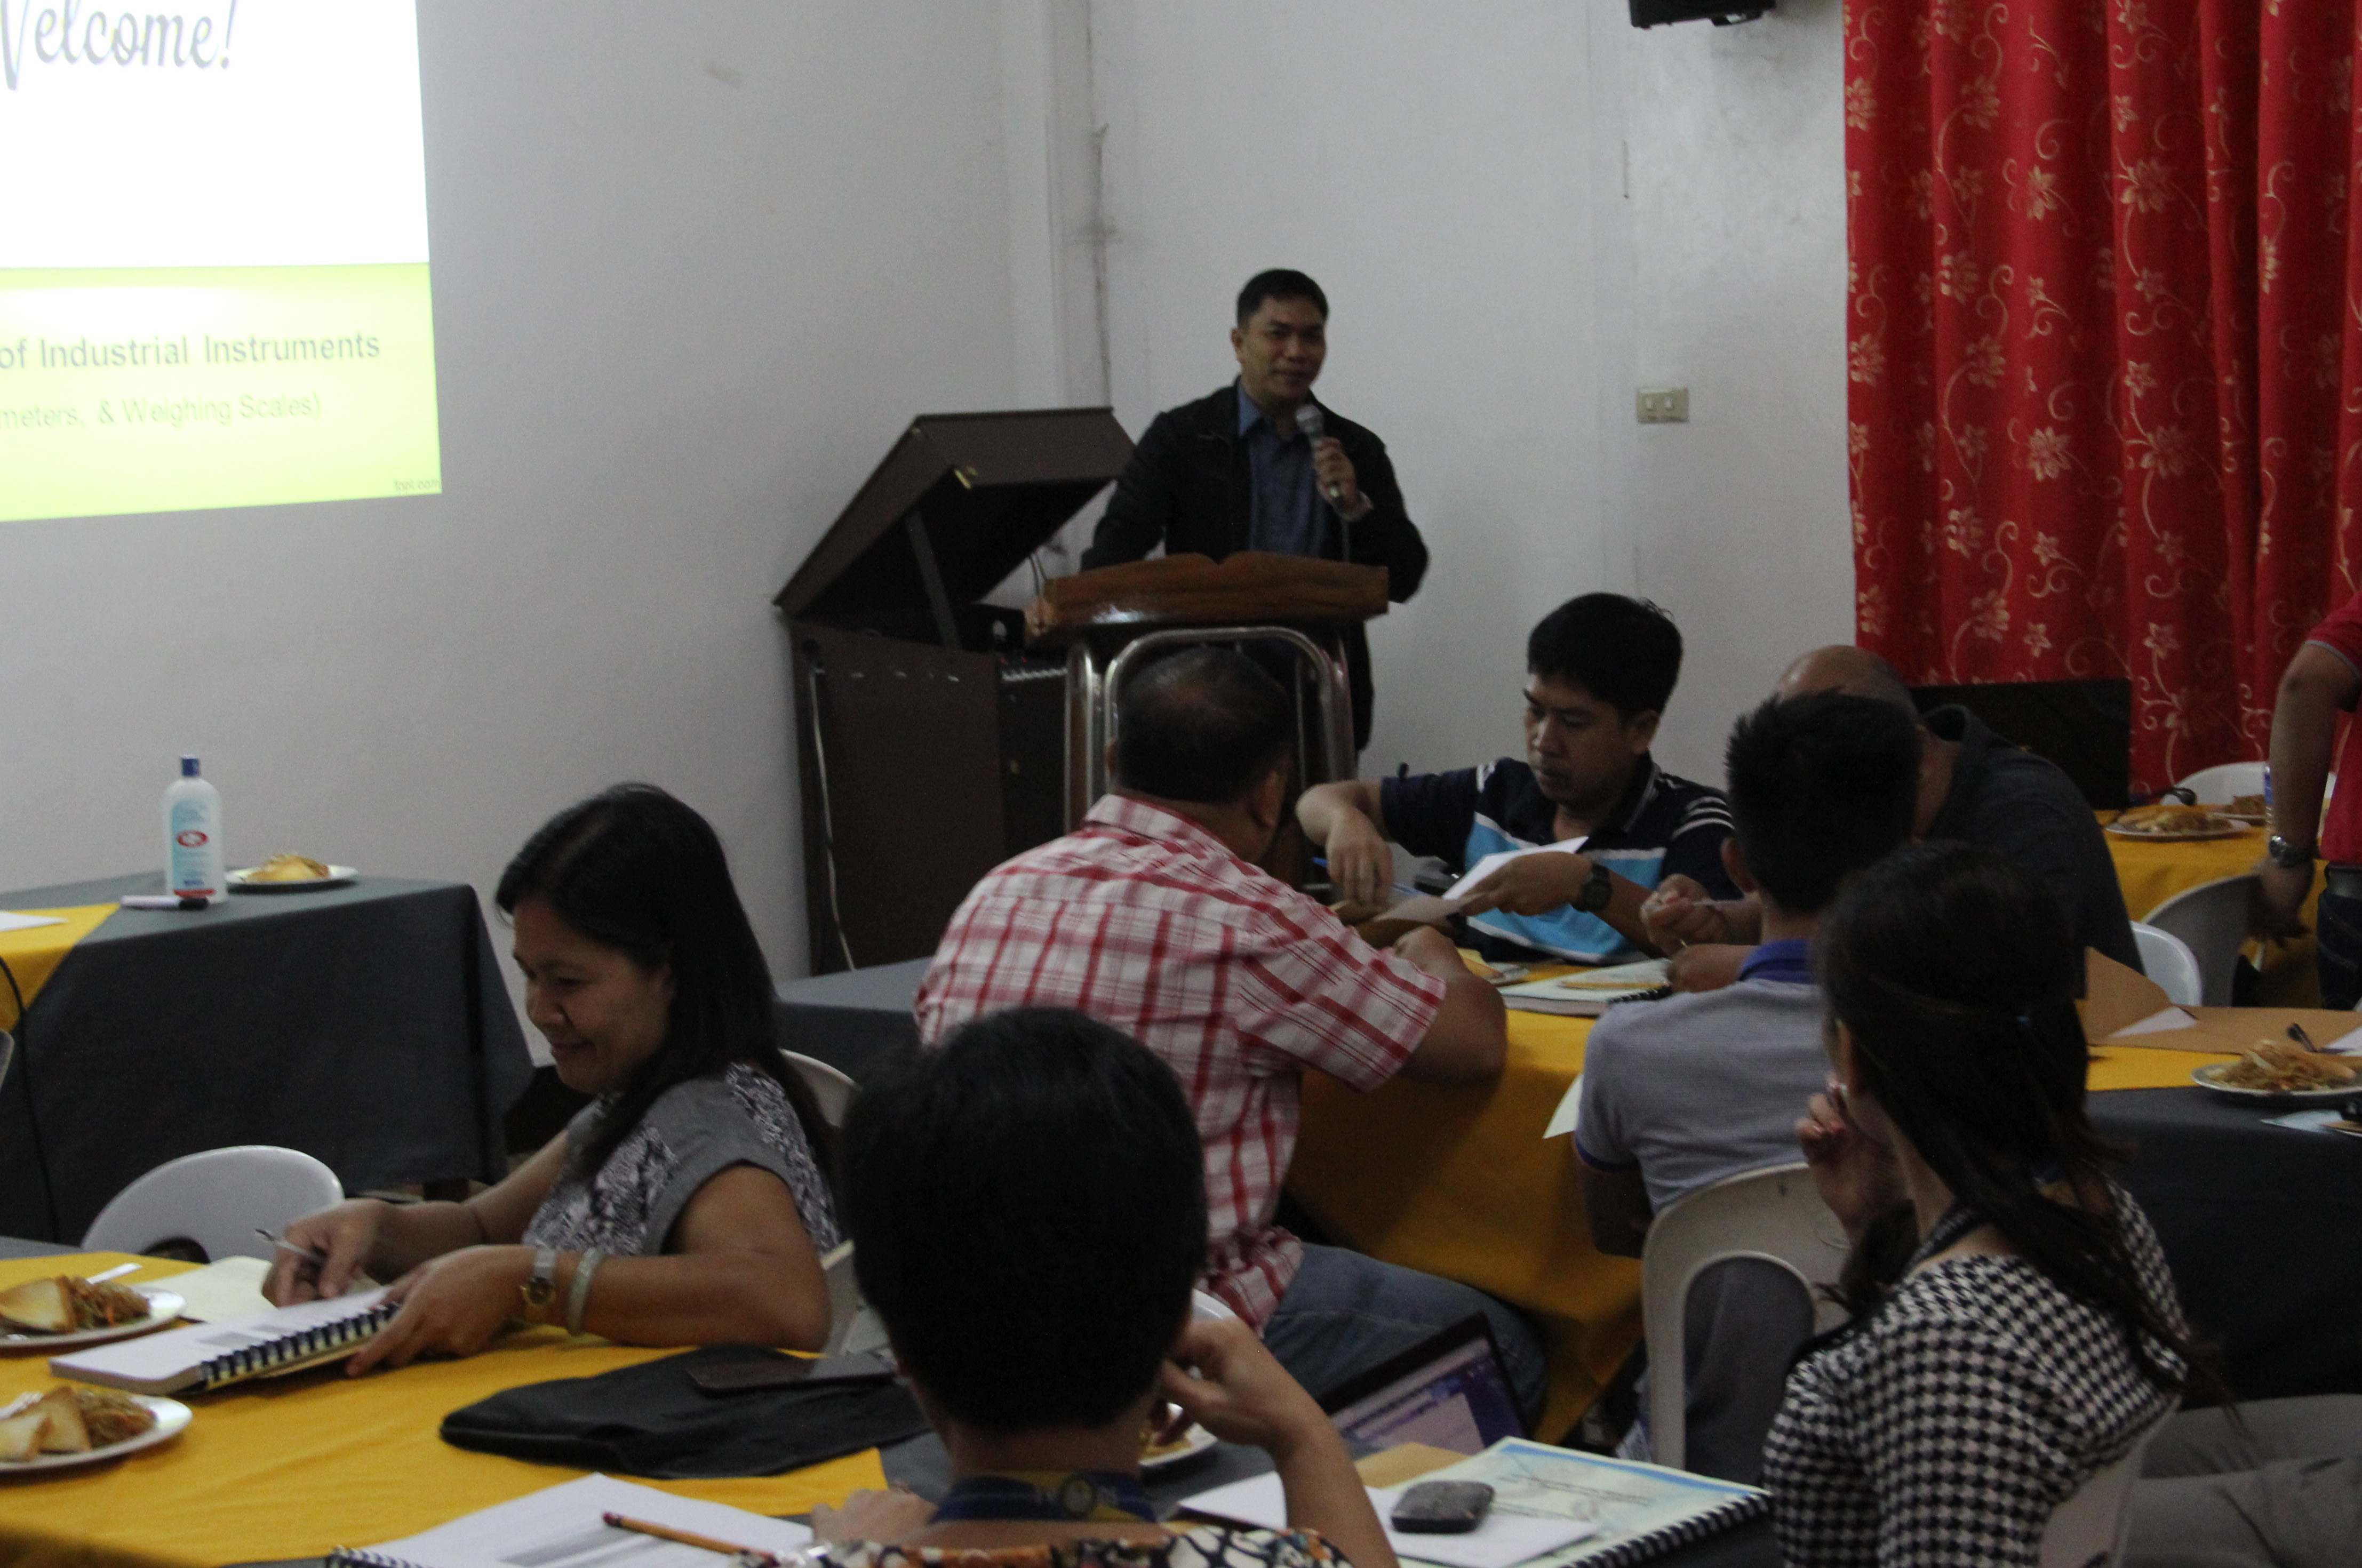 Engr. Rommel N. Corona discusses the essentials of the industrial calibration equipment.